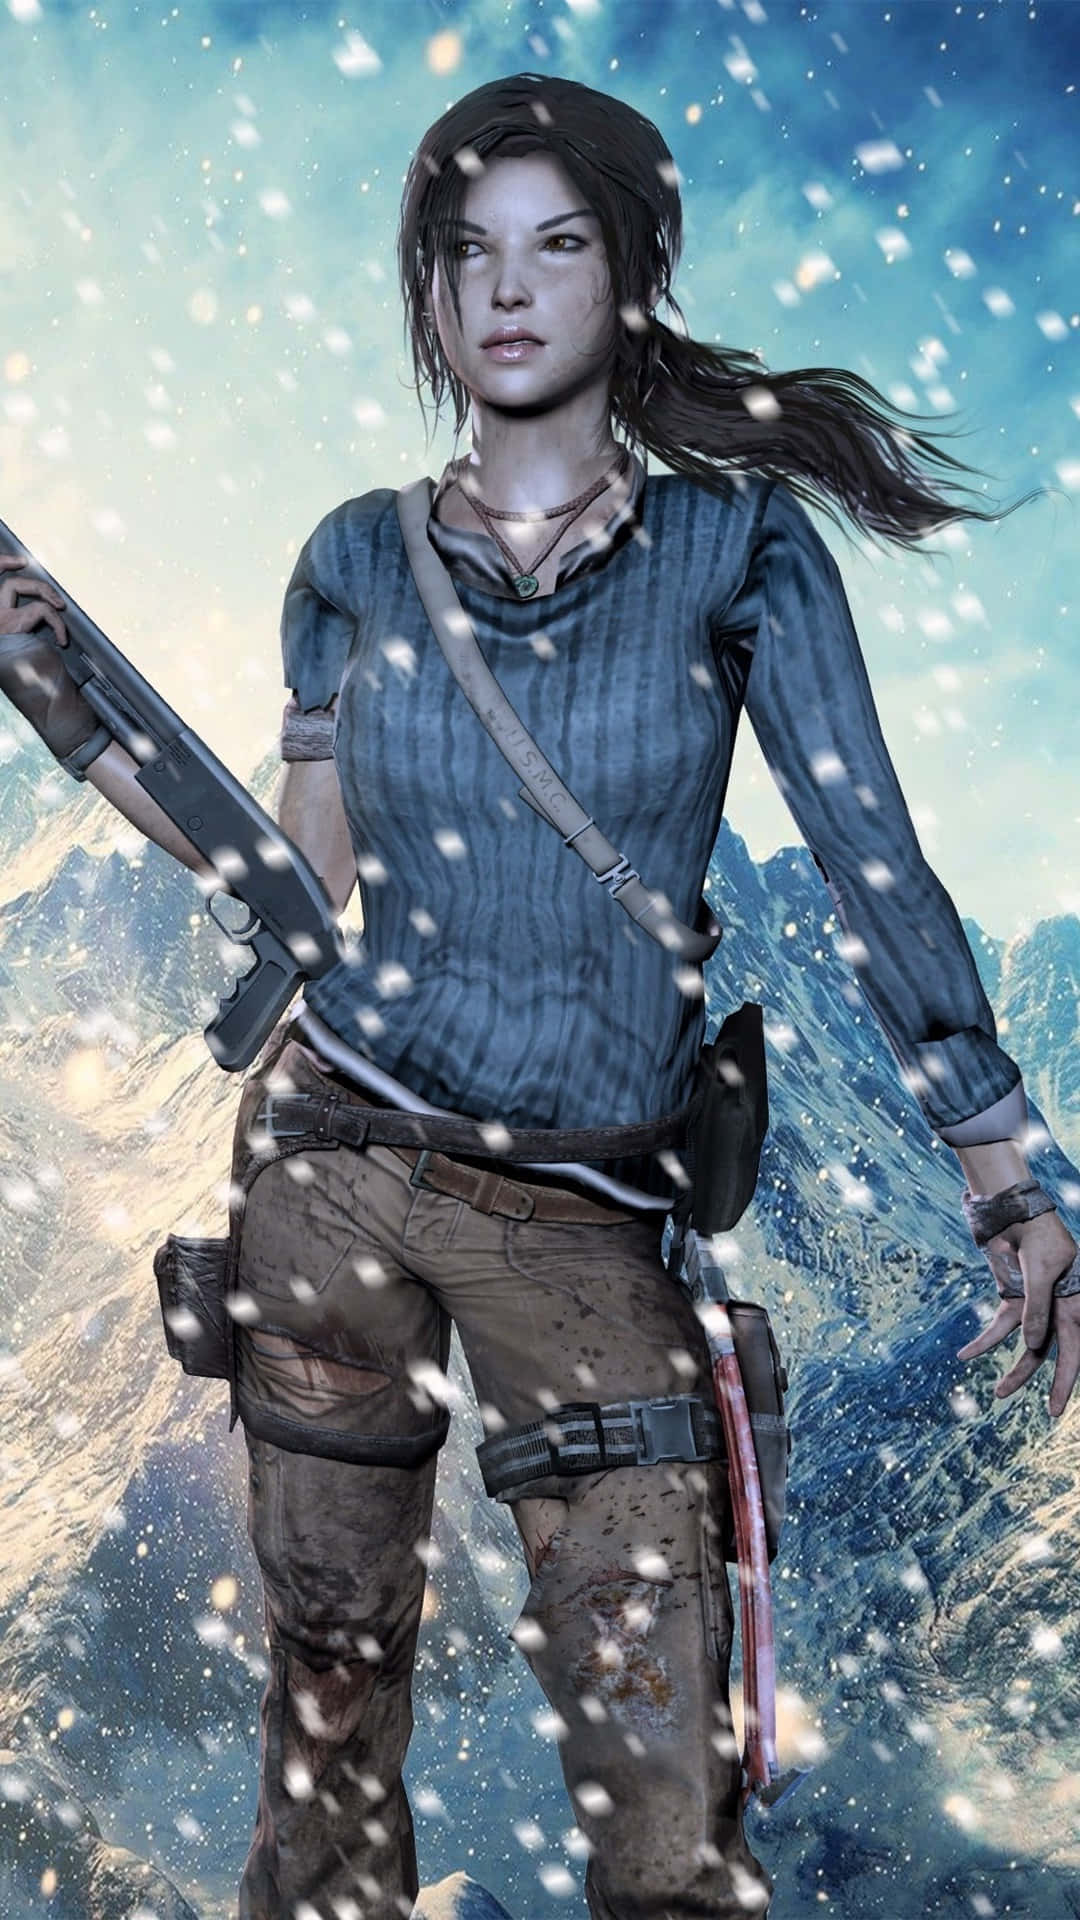 Get ready for an action-packed adventure with the Tomb Raider Iphone 5s! Wallpaper